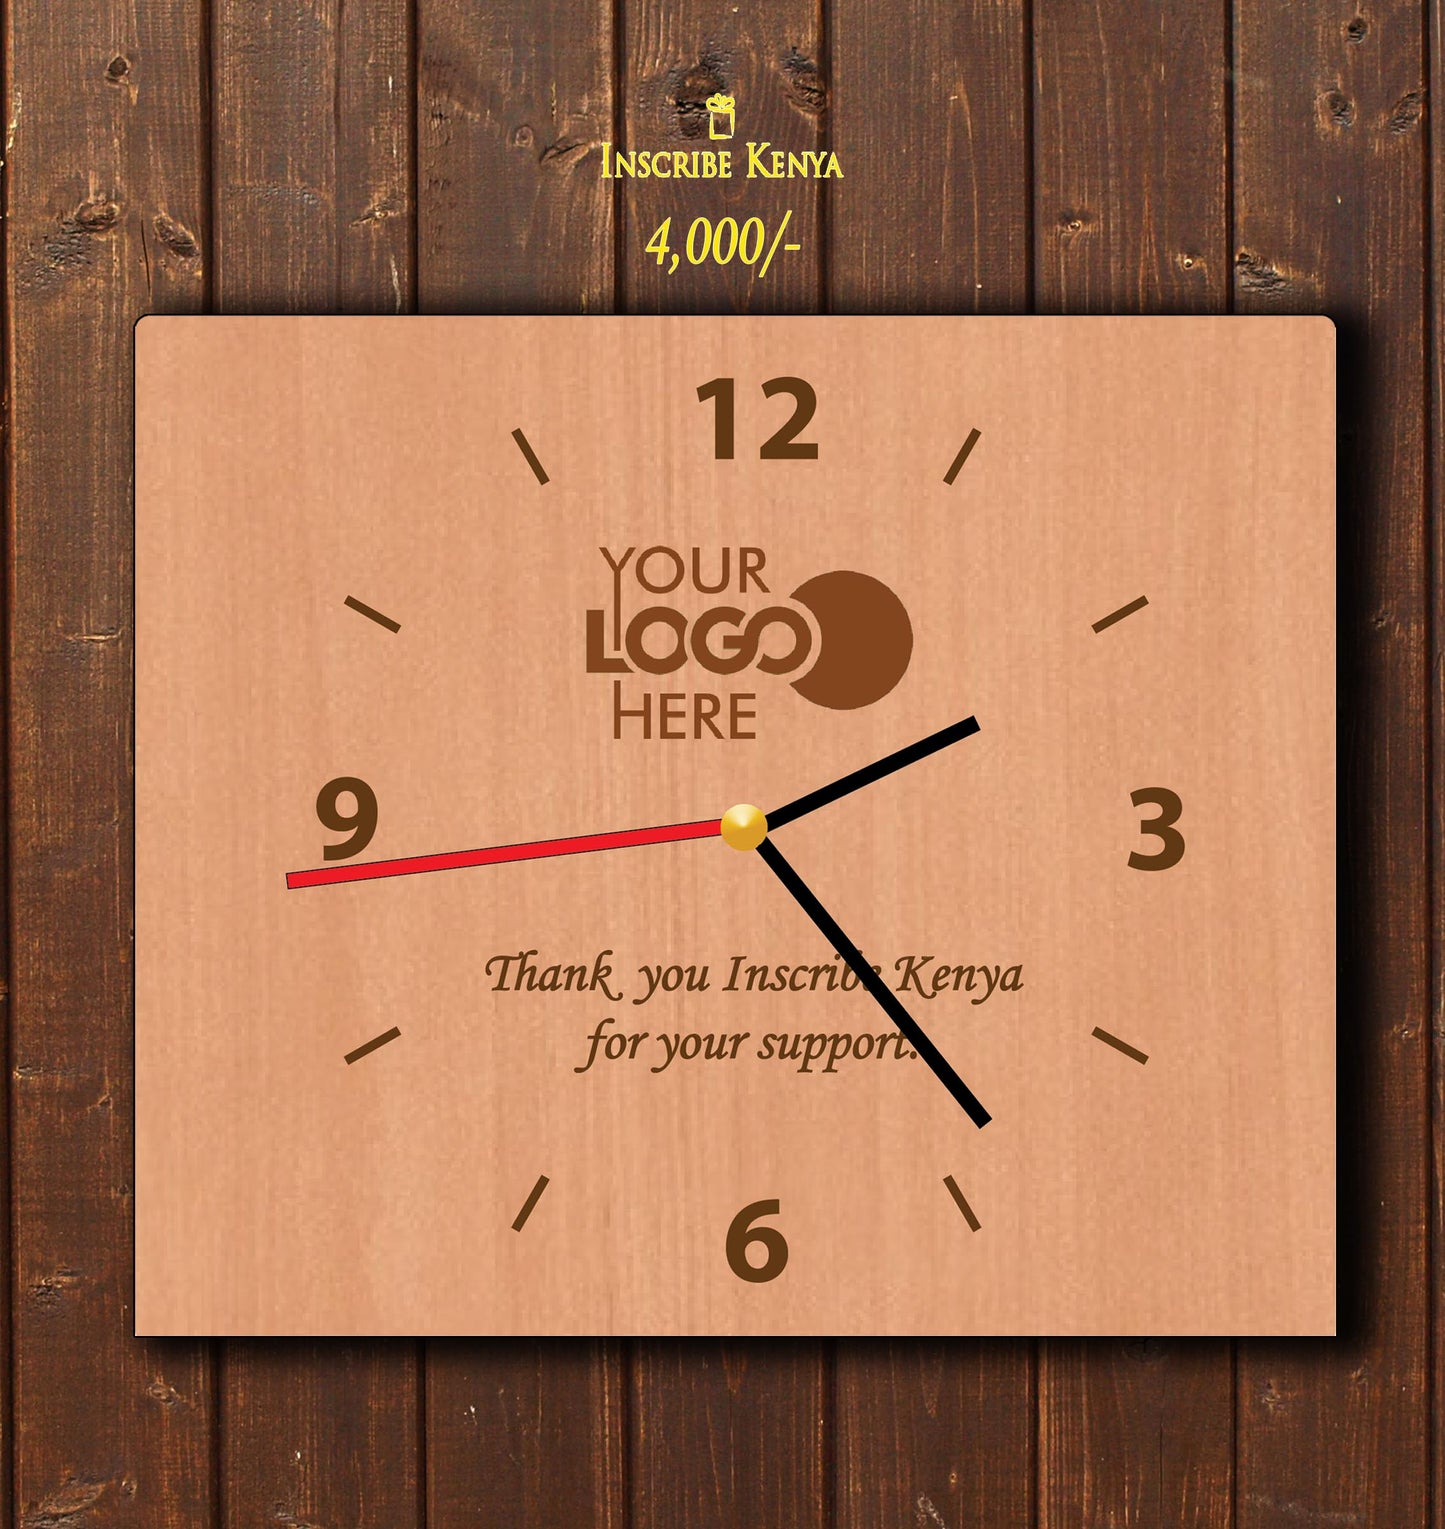 Wooden Square Wall Clock